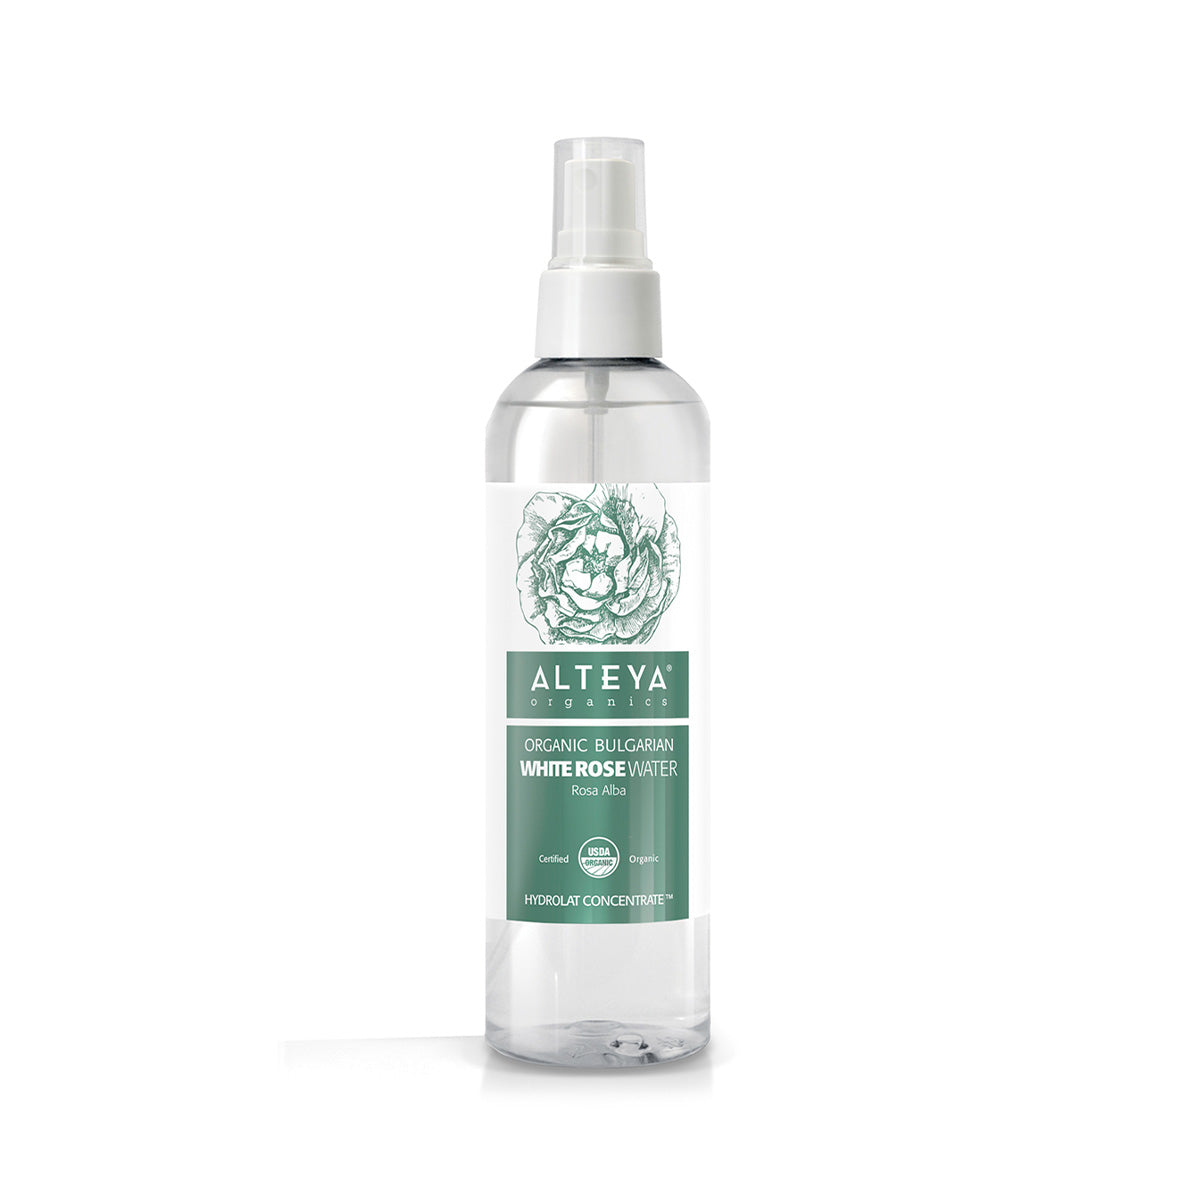 A bottle of Alteya Organics' Organic Bulgarian White Rose Water (Rosa Alba) - 8.5 Fl Oz Spray on a white background, infused with the delicate essence of white rose water.